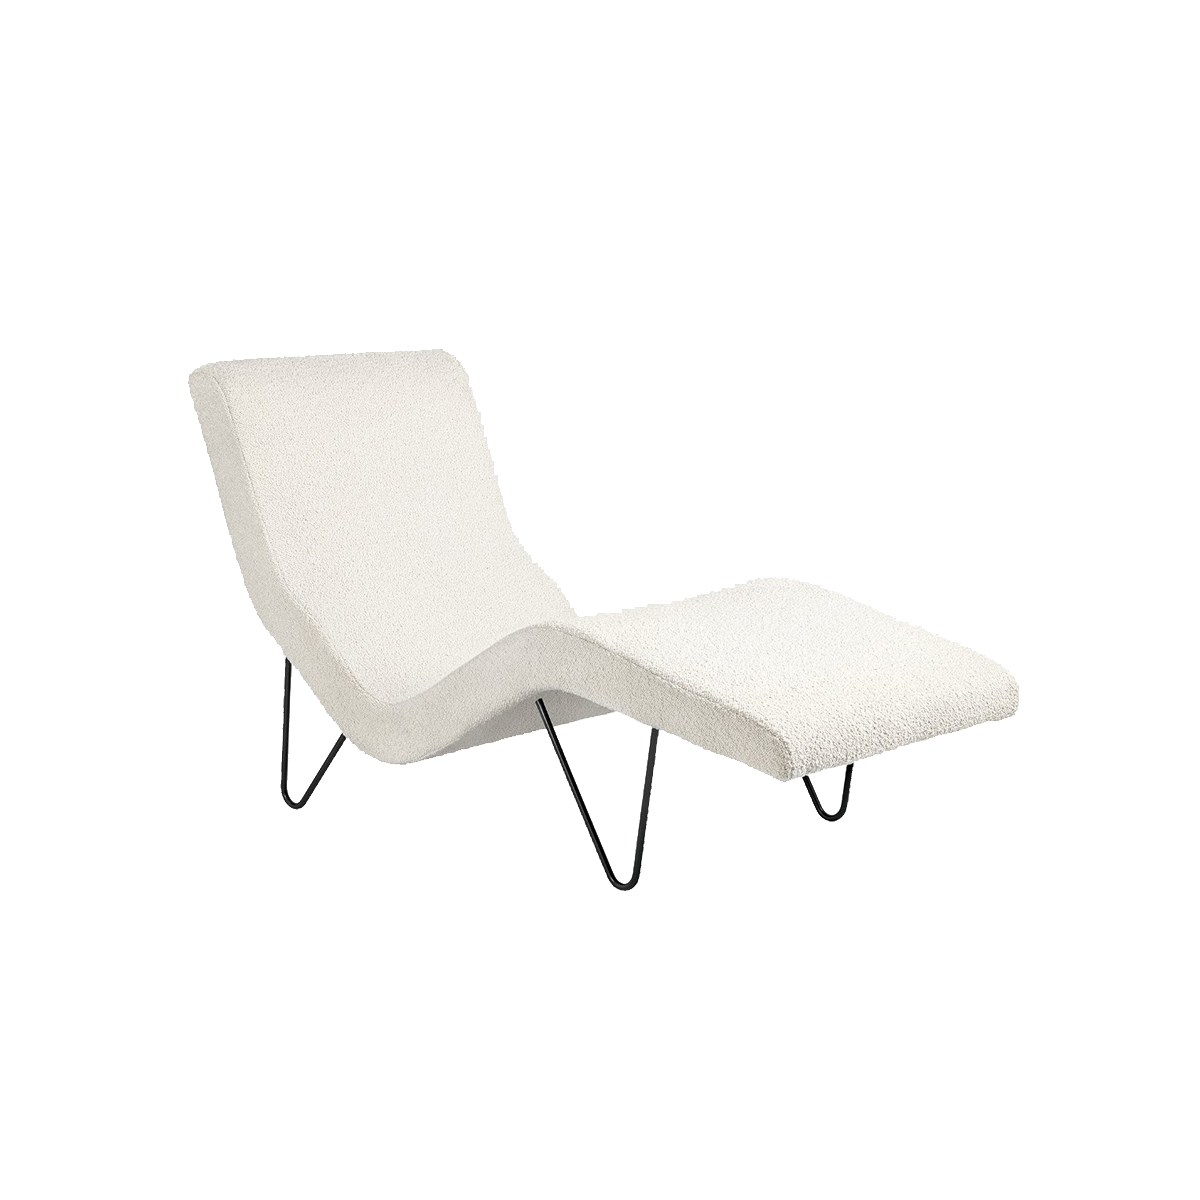 Gmg Chaise Longue